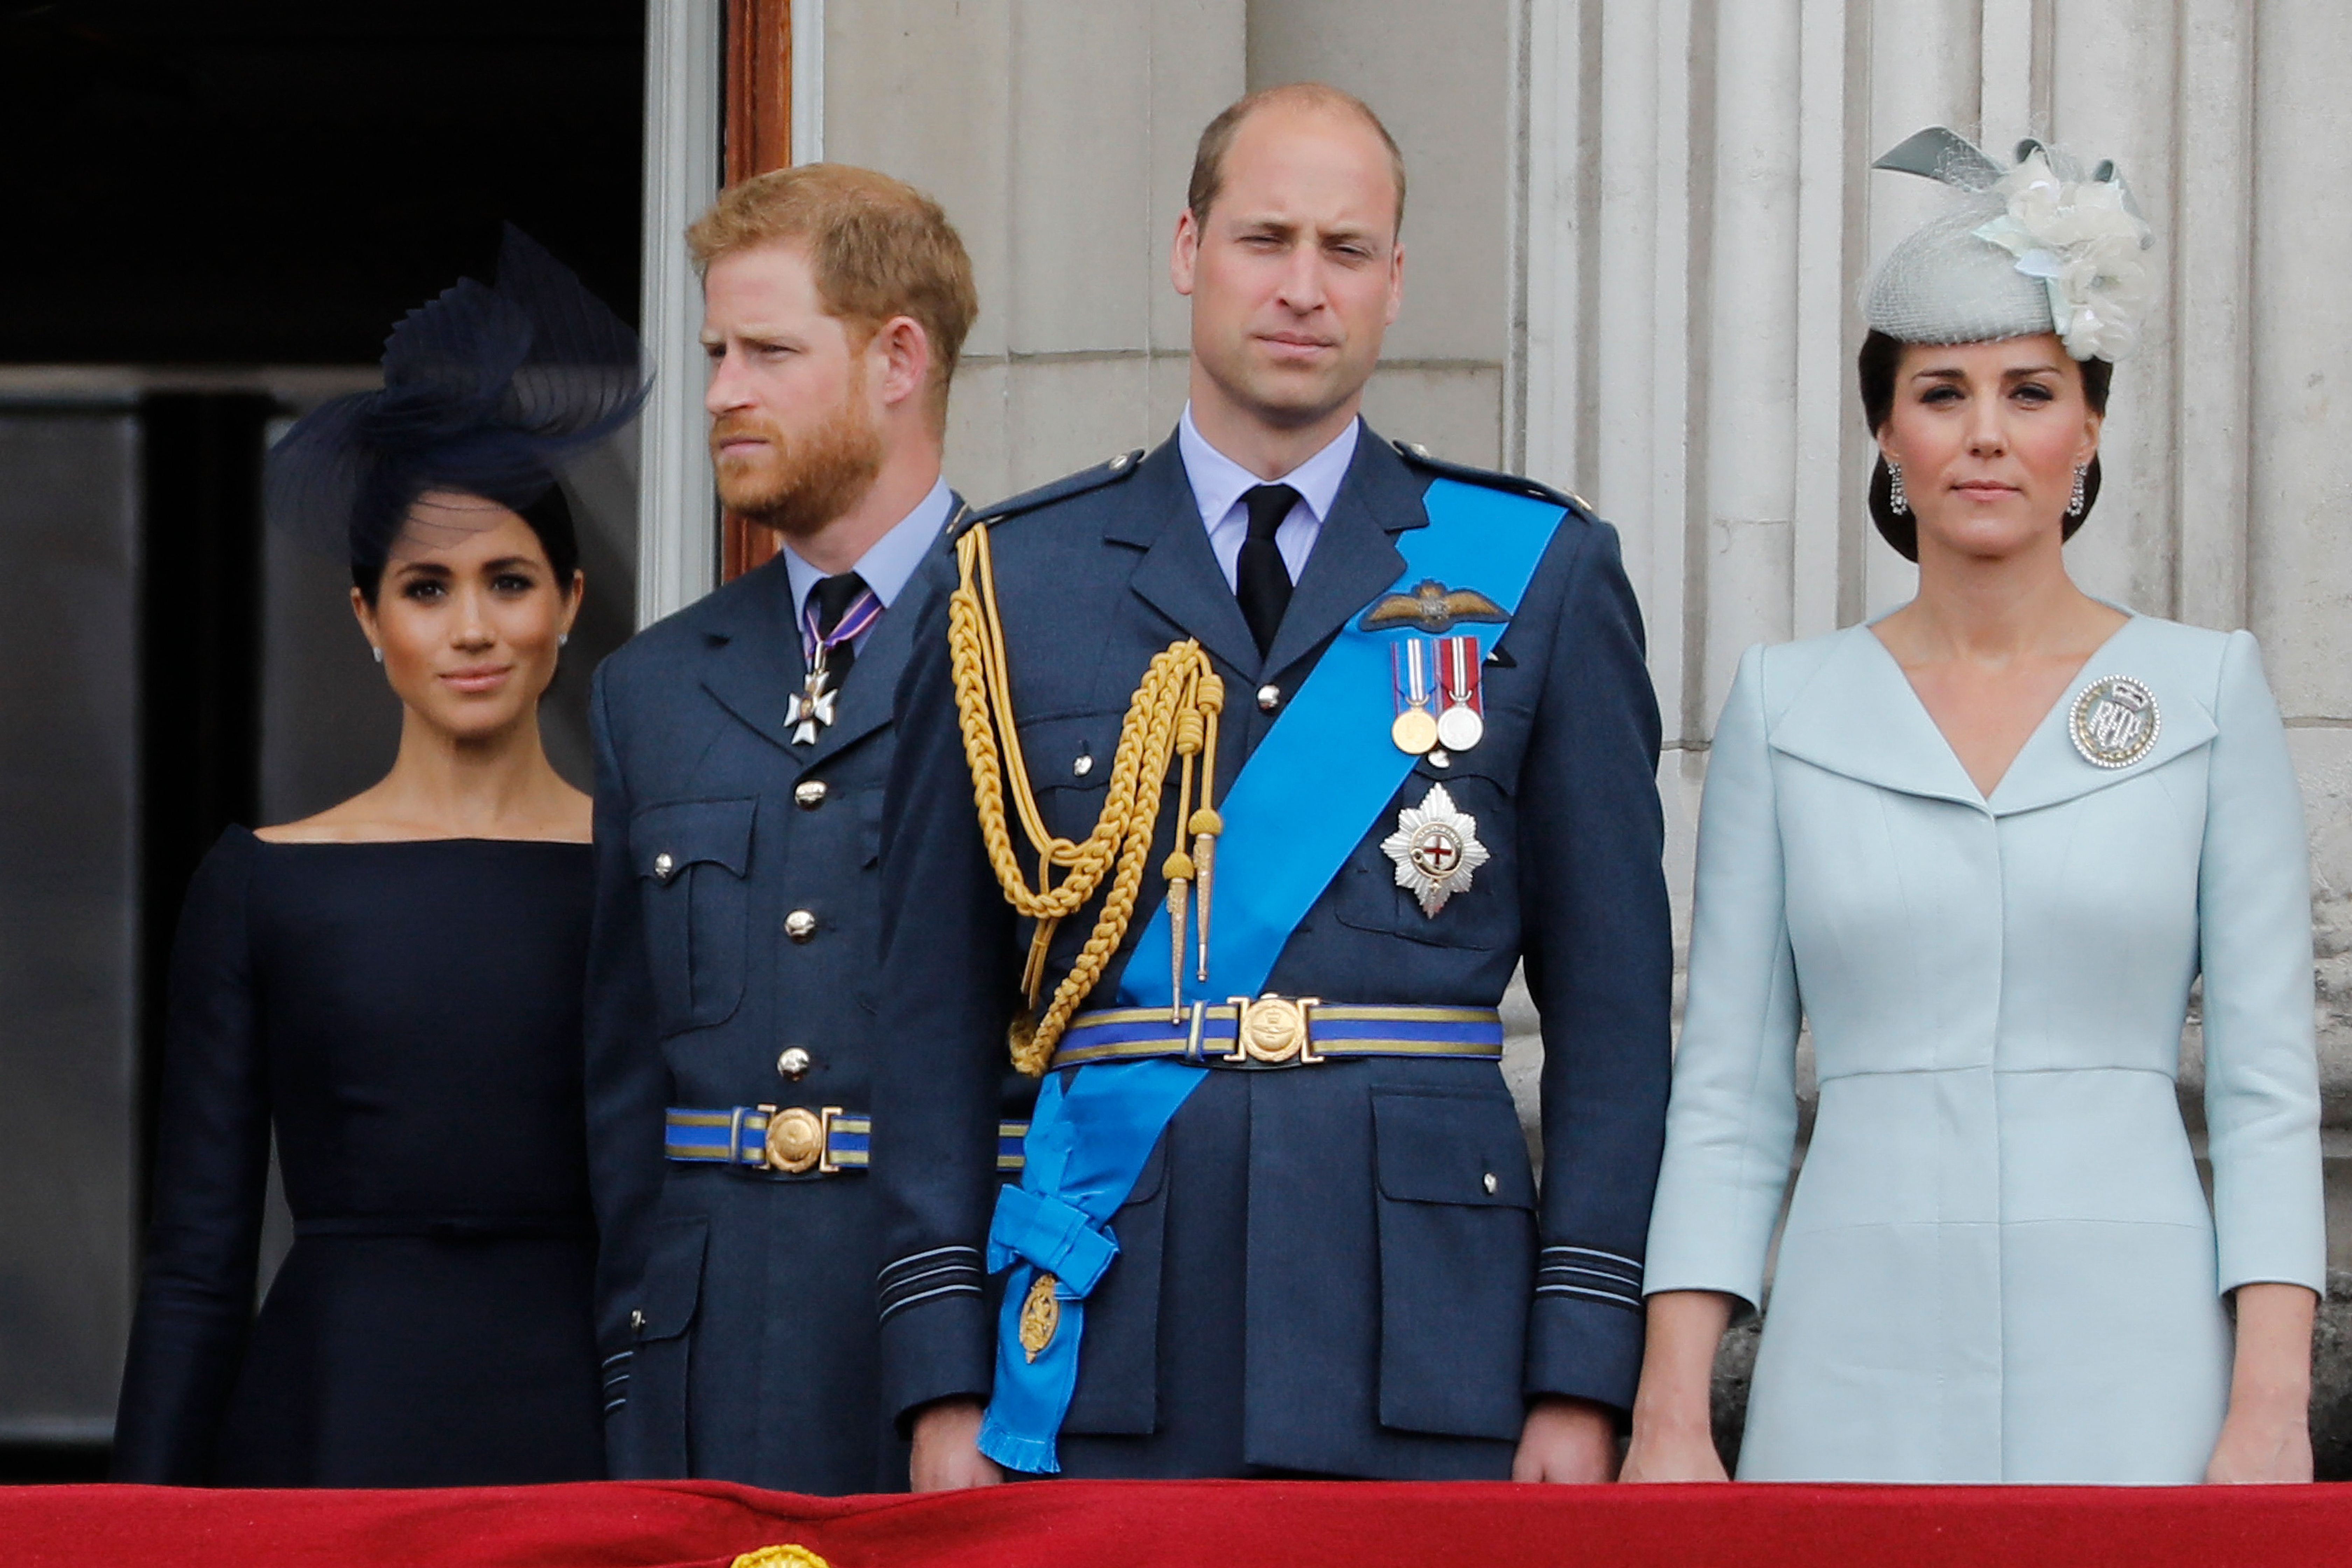 Meghan Markle, Prince Harry, Prince William, and Kate Middleton during the centenary of the Royal Air Force (RAF) in London, England on July 10, 2018 | Source: Getty Images